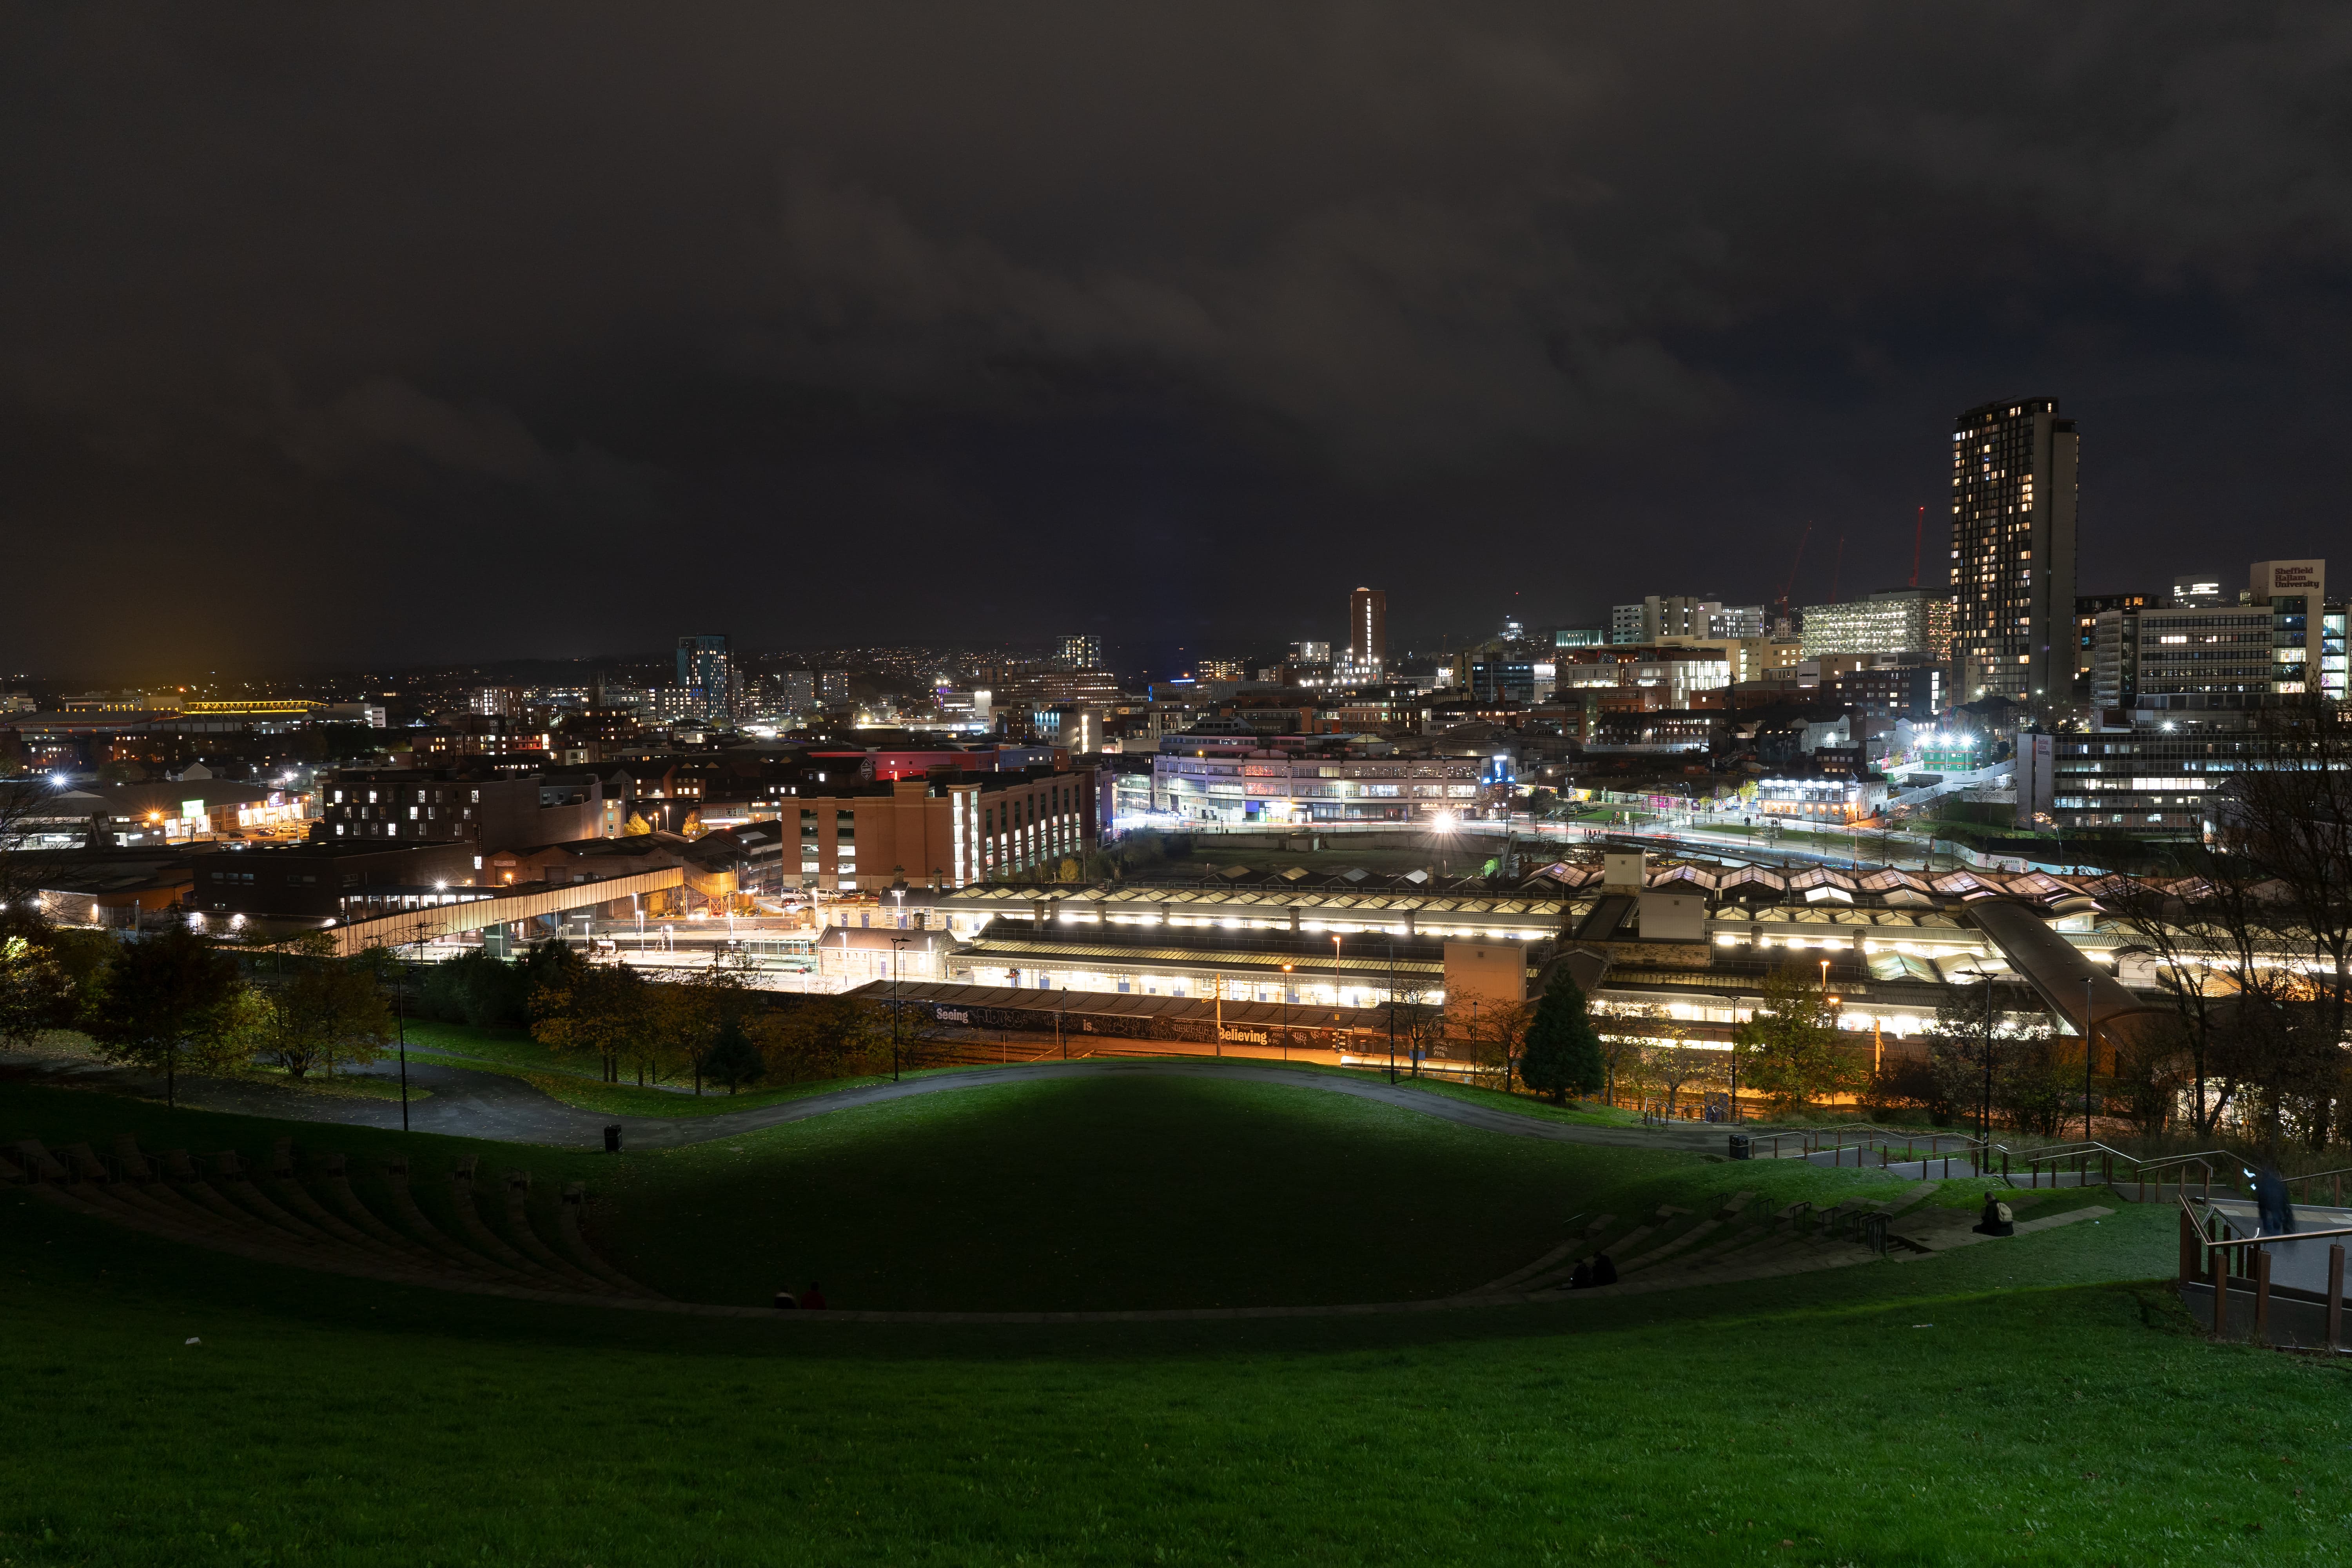 Sheffield at night, raw to jpeg, 24mm, 2s, f/5.6, ISO400, Sony A7 III